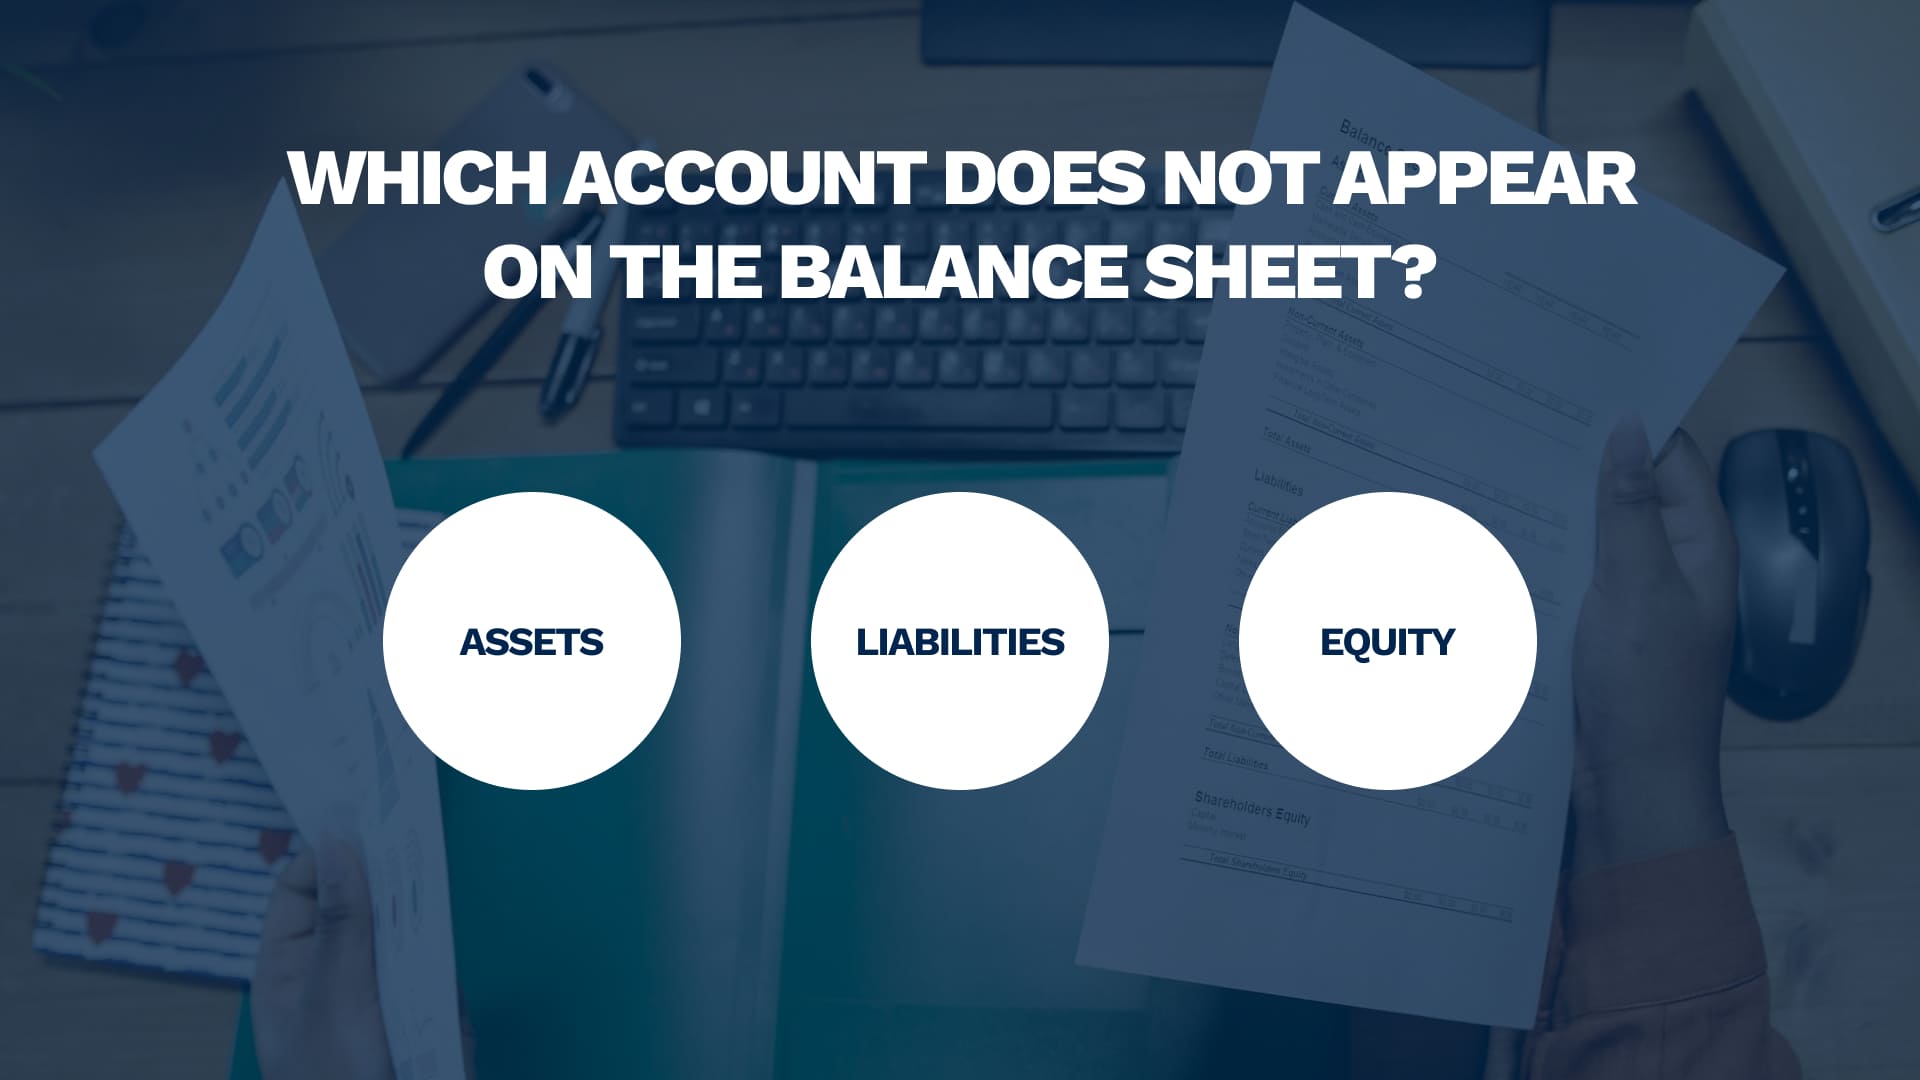 Which Account Does Not Appear On The Balance Sheet?